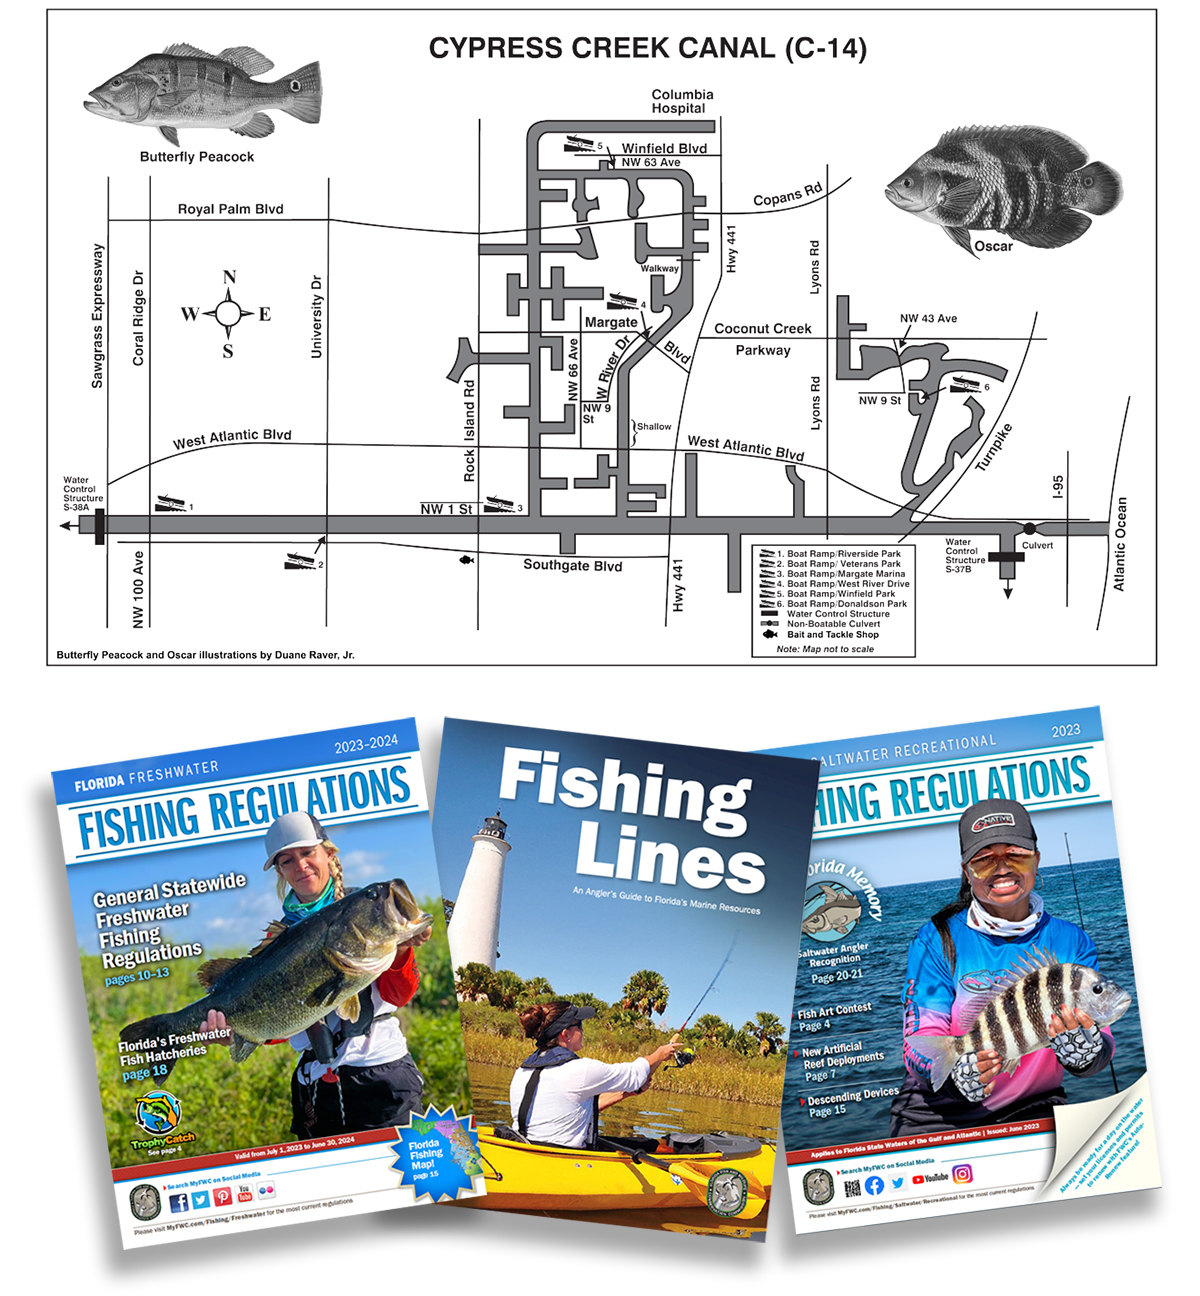 C-14 Canal map, fishing regulations booklets, Fishing Lines magazine